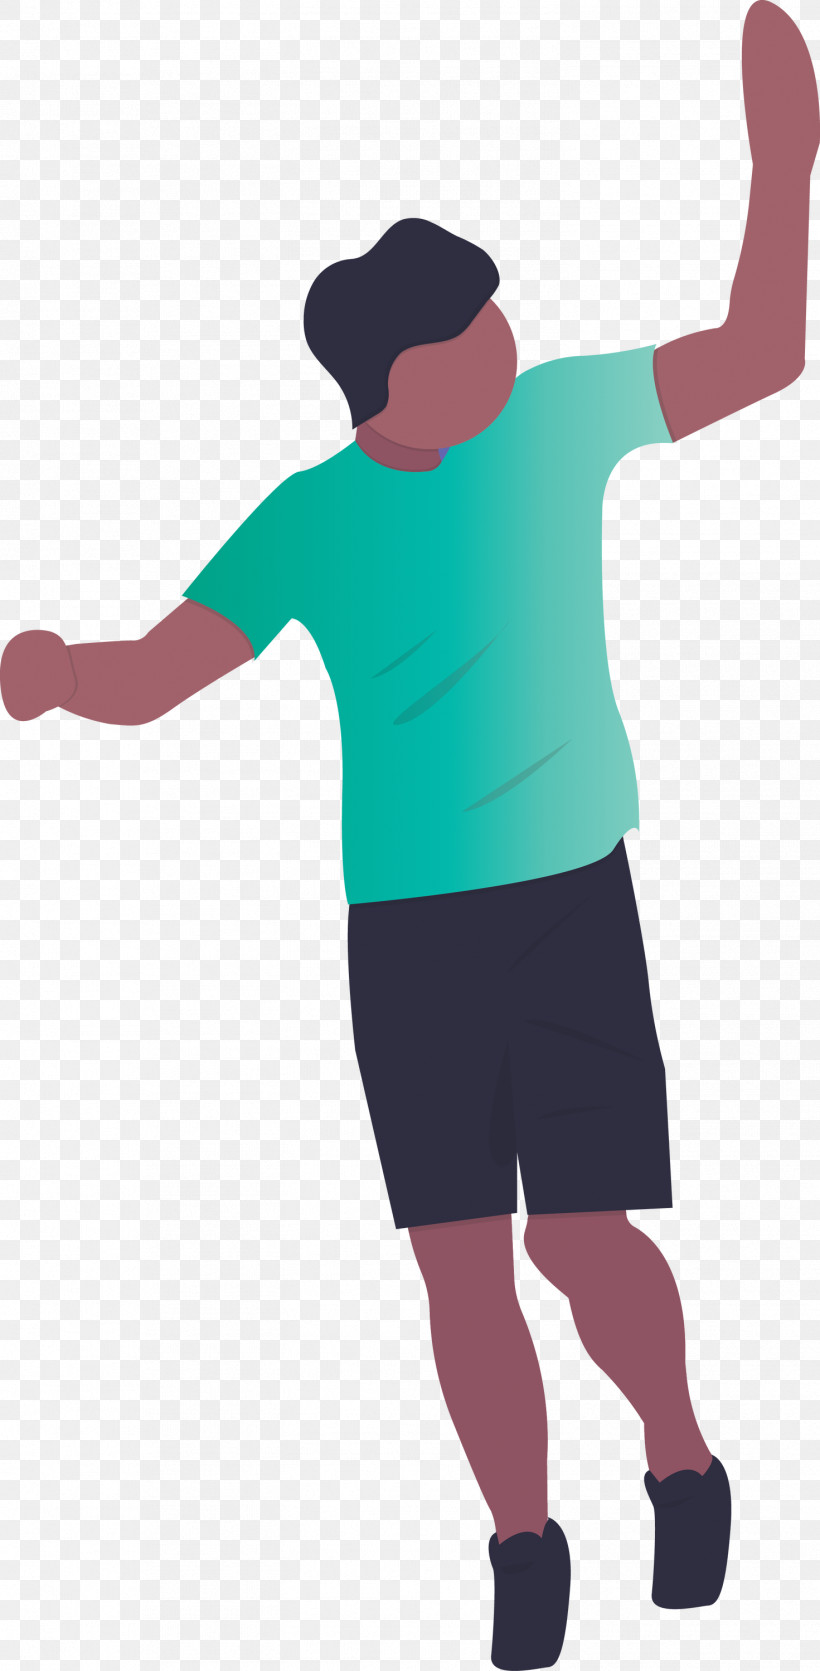 Standing Arm Joint Sleeve Gesture, PNG, 1471x2999px, Standing, Arm, Child, Gesture, Joint Download Free